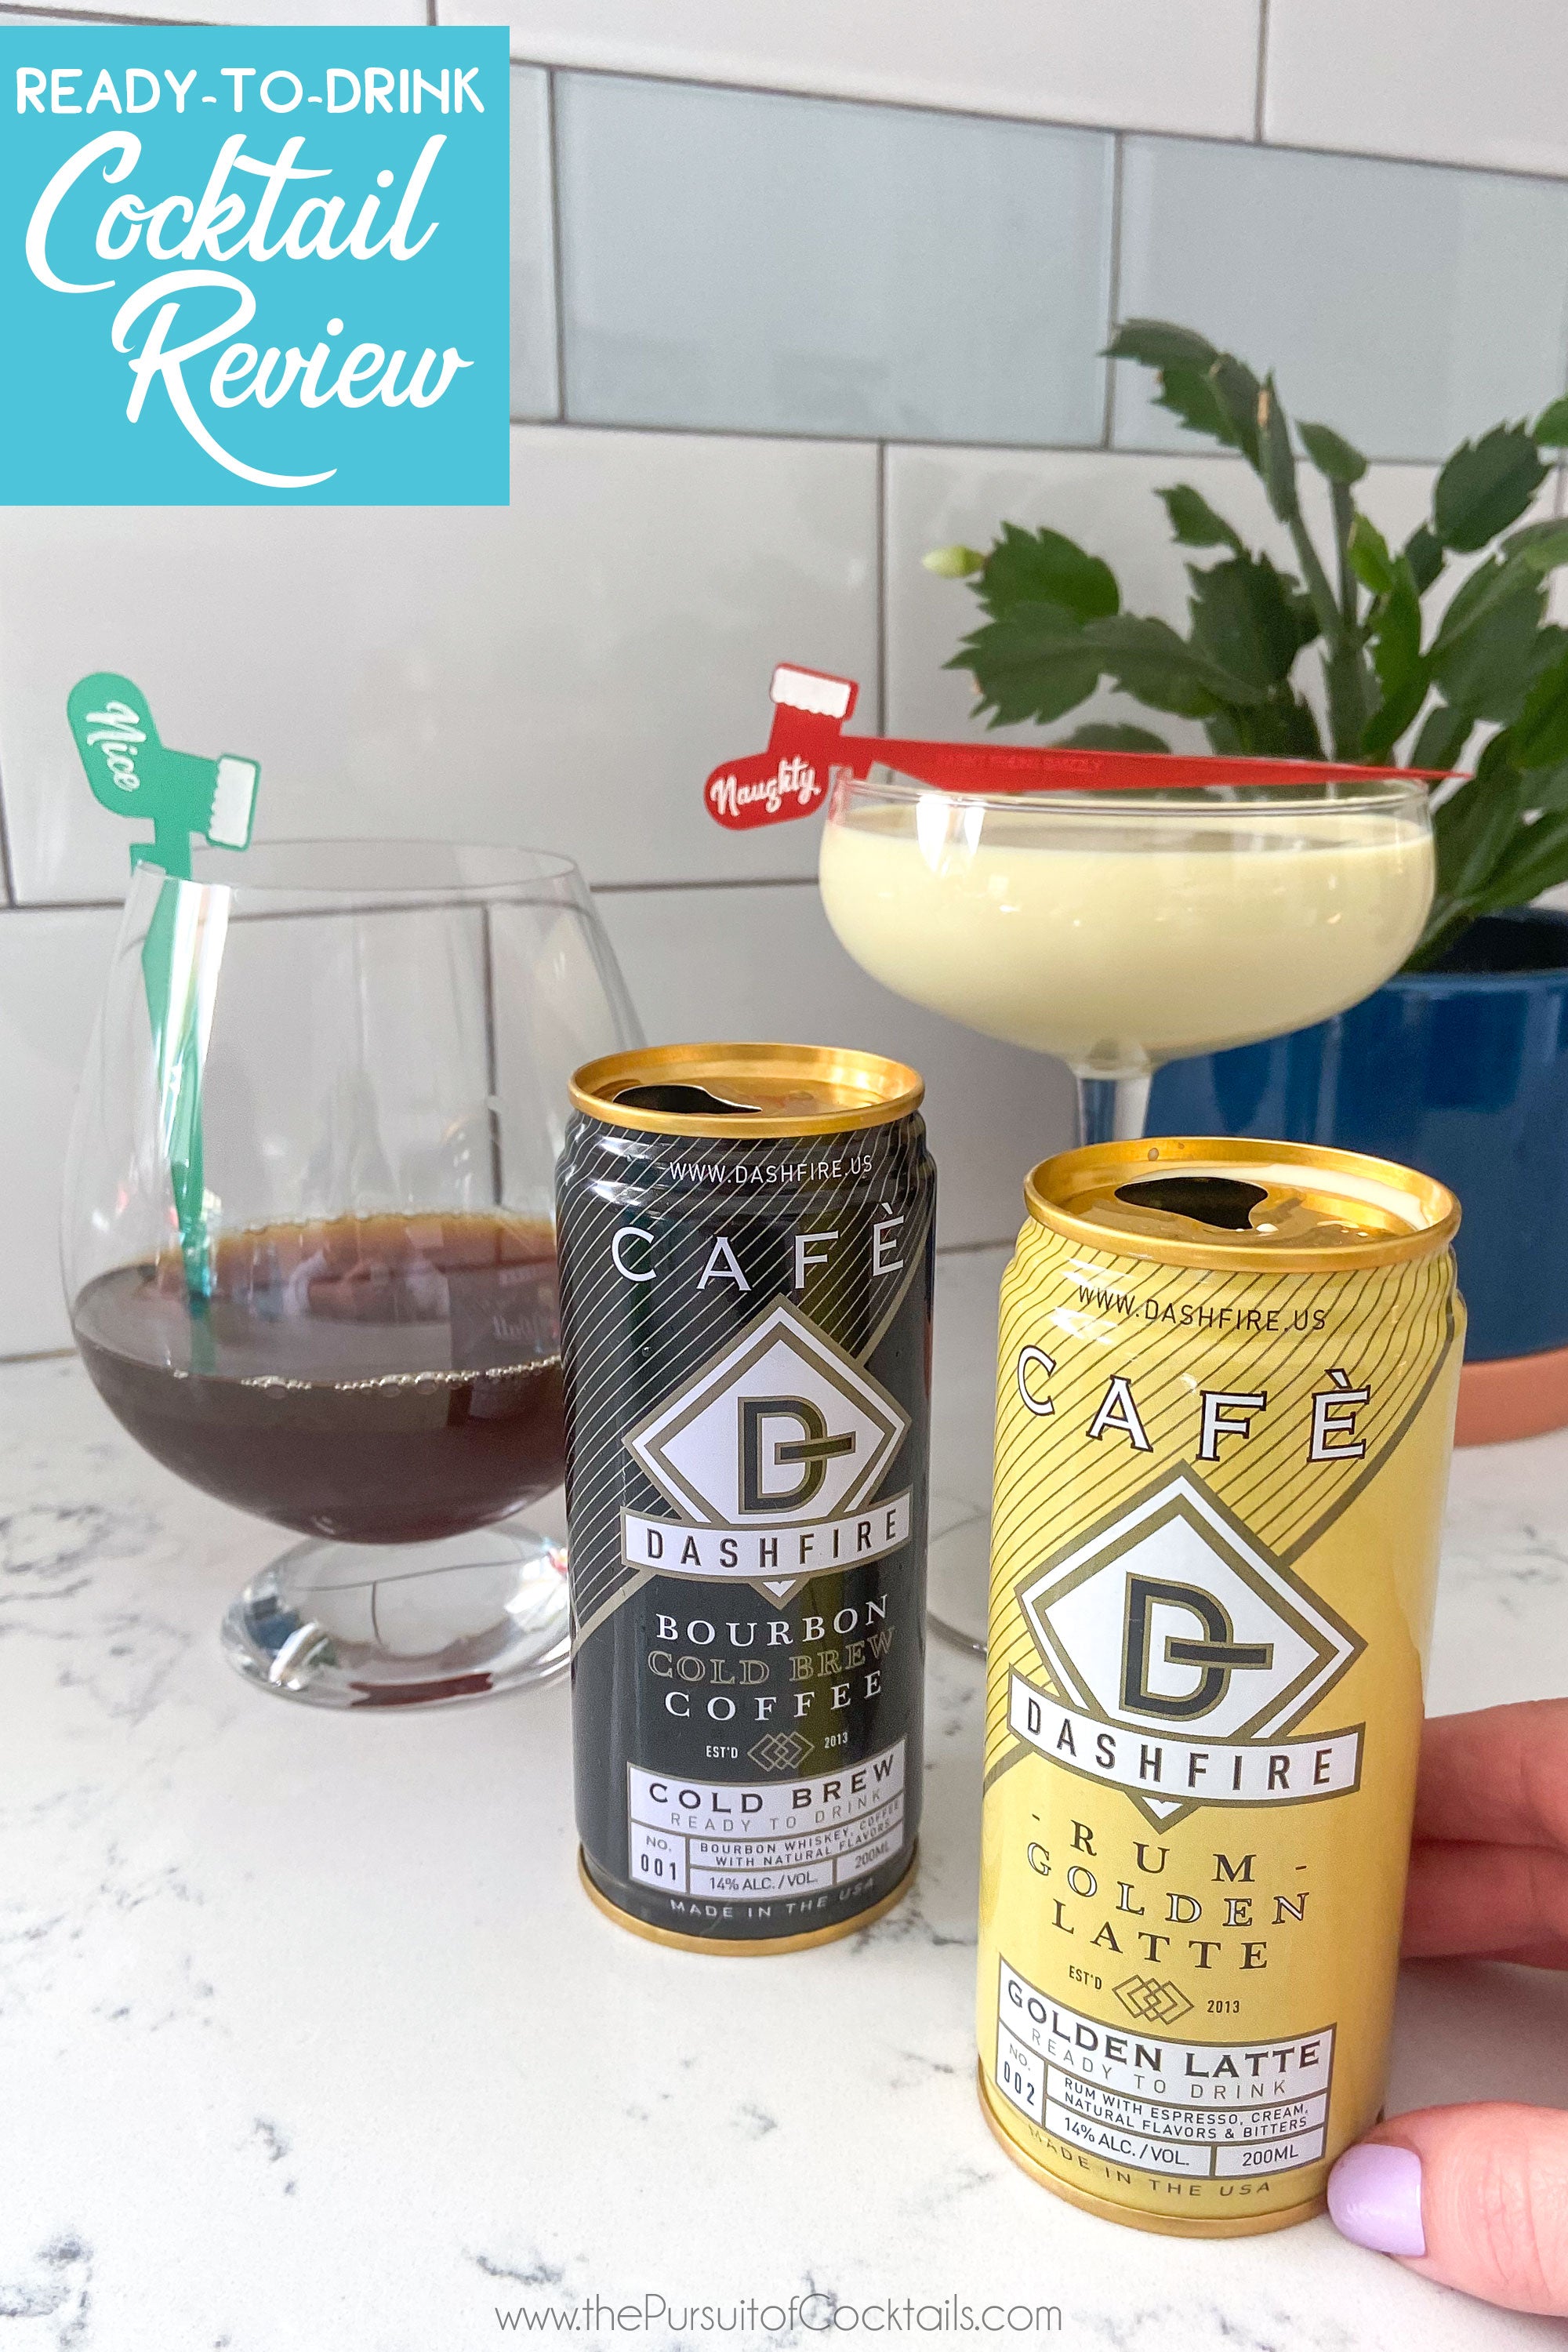 Dashfire ready-to-drink coffee cocktails reviewed by The Pursuit of Cocktails